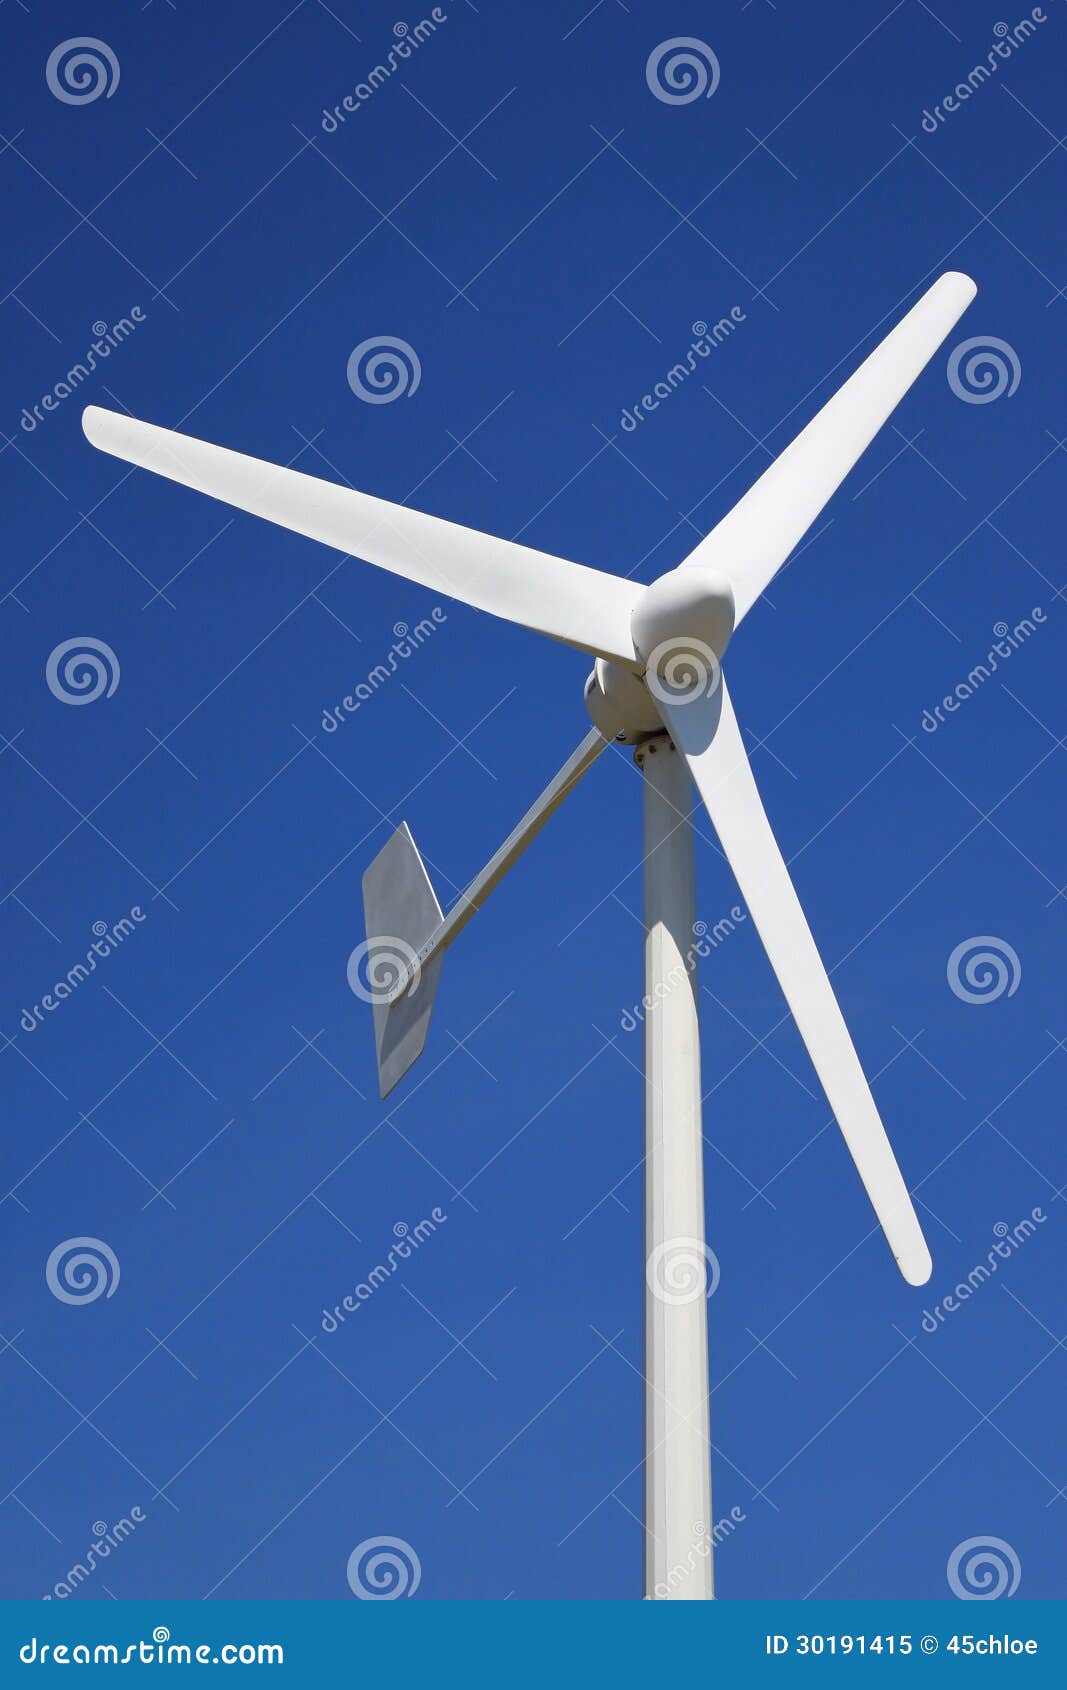 wind turbine for renewable energy on a background of blue sky.